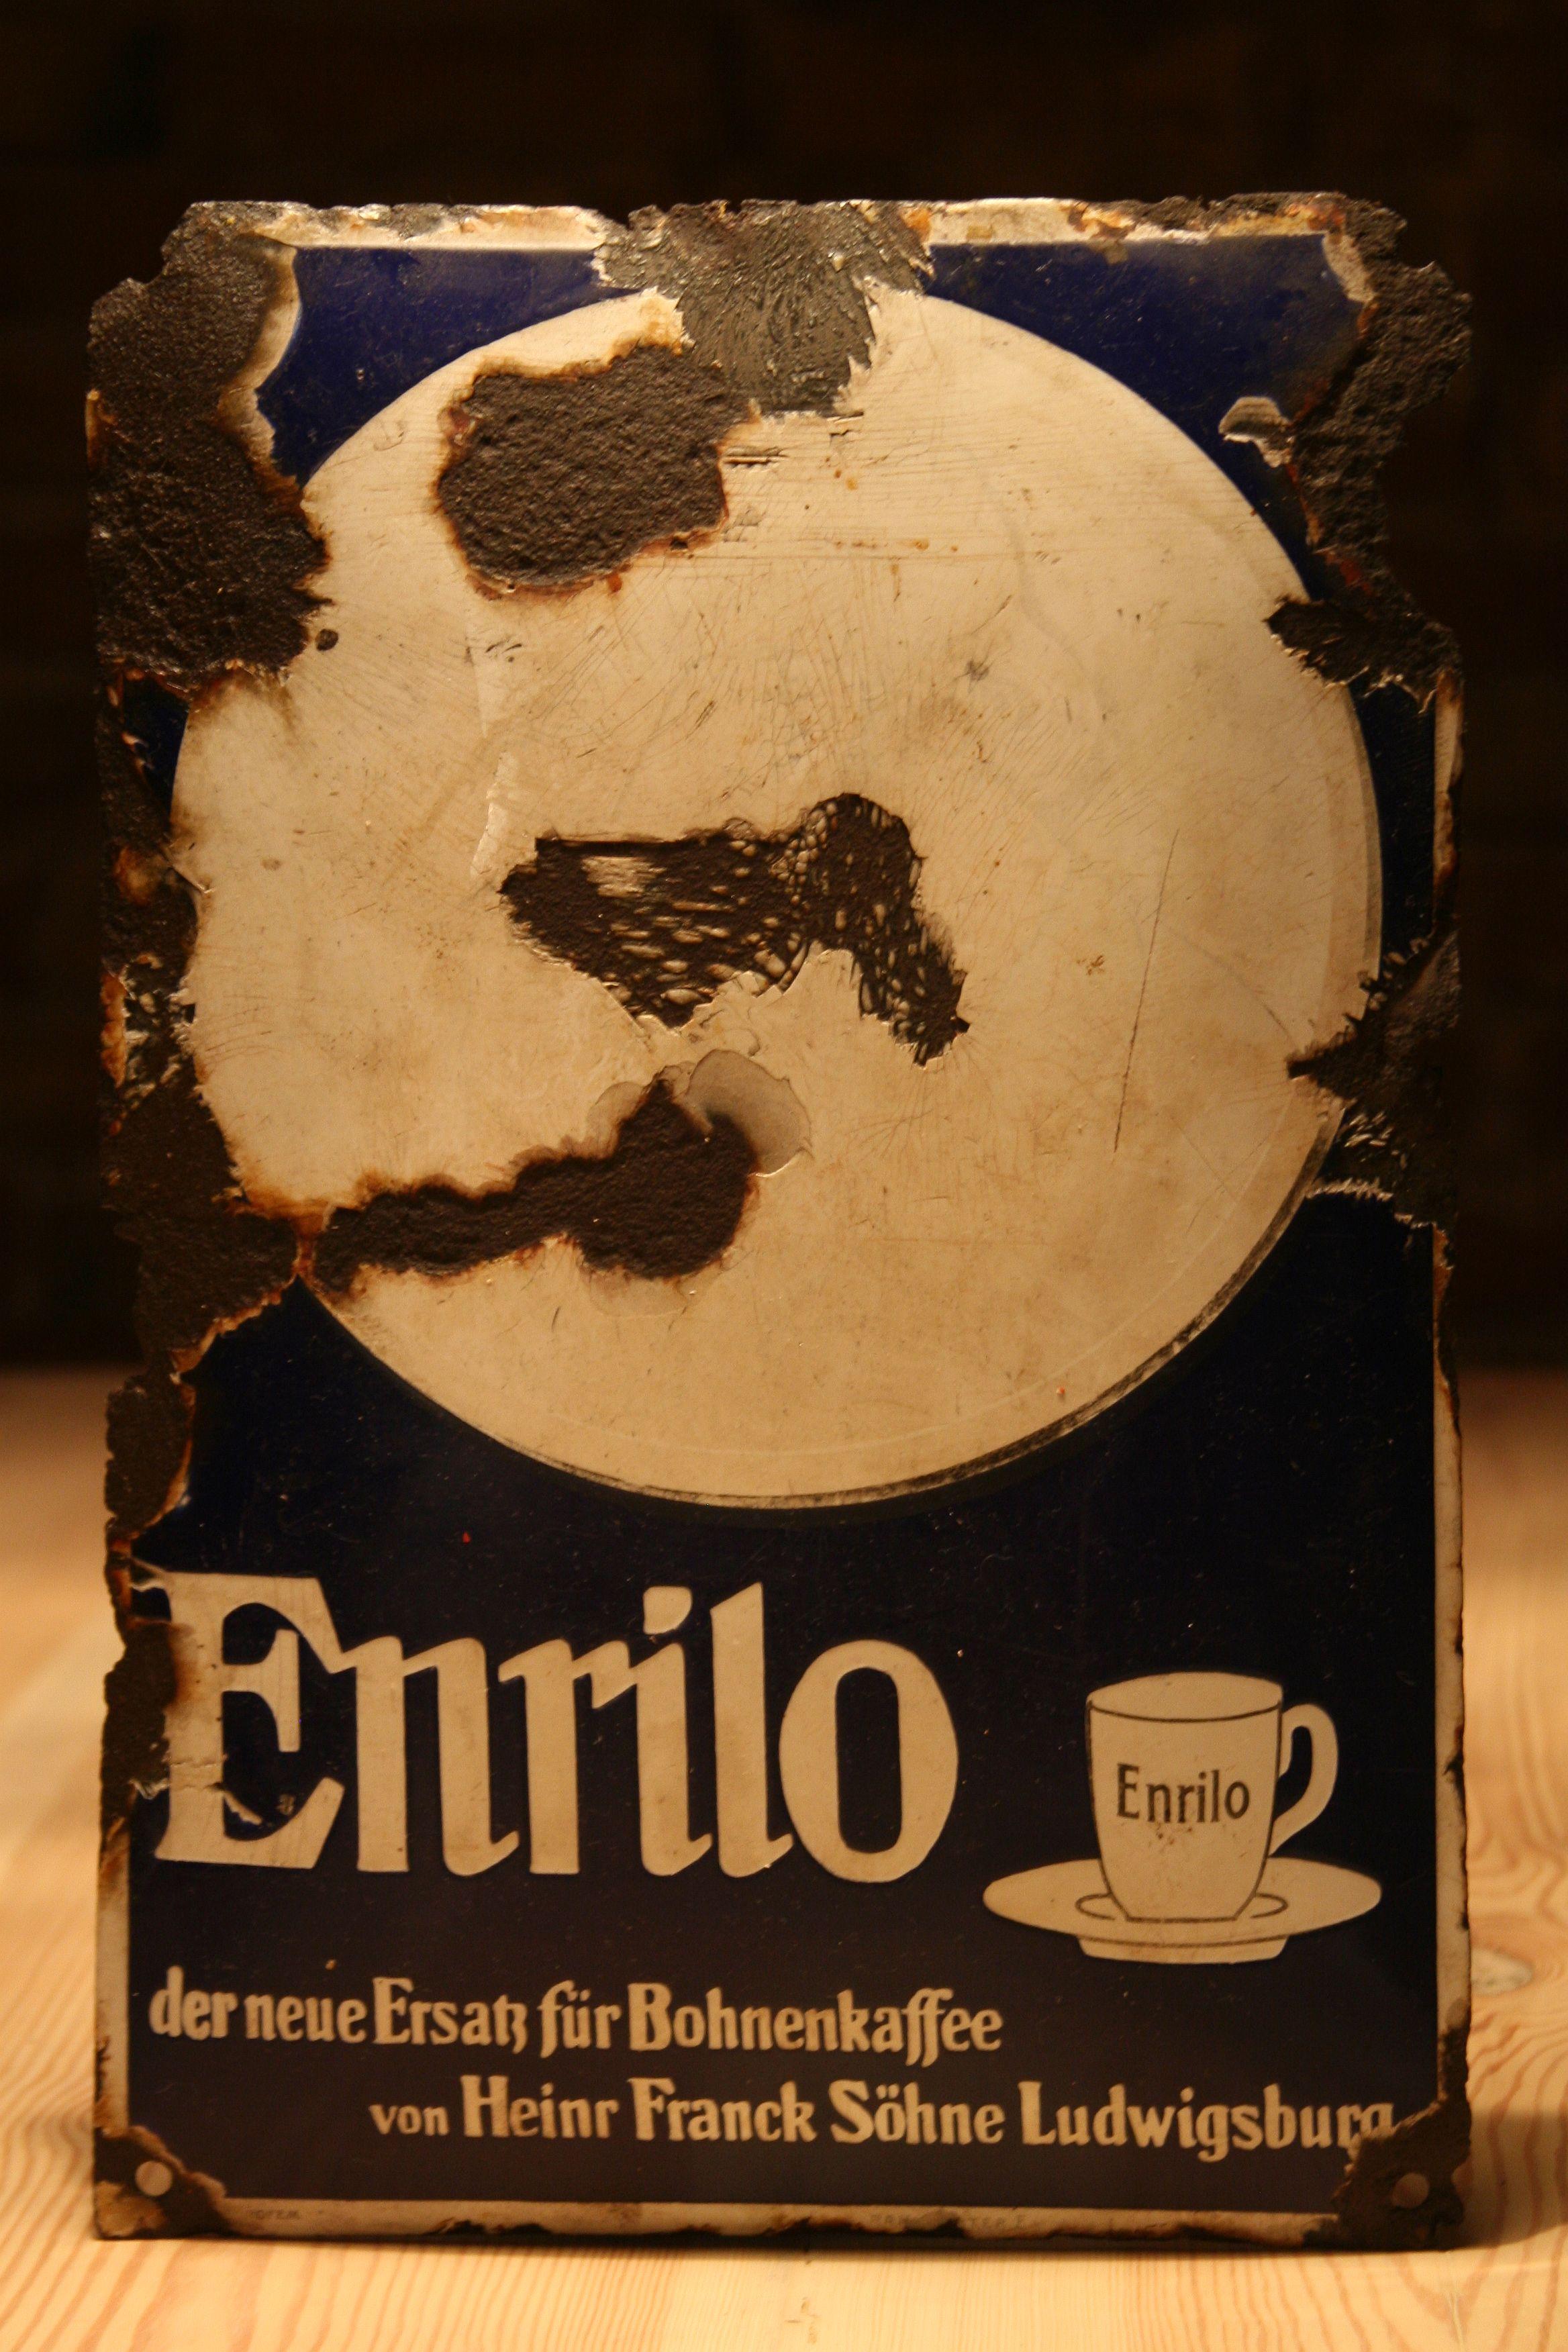 An original 1930s German advertising signboard, Enrilo coffee - a new alternative to the popular coffee beans.
Coffee producer: Heinr Franck Sohne Ludwigsburg, established in 1828.
Construction:
Pressed convex steel sheet covered with two-colored